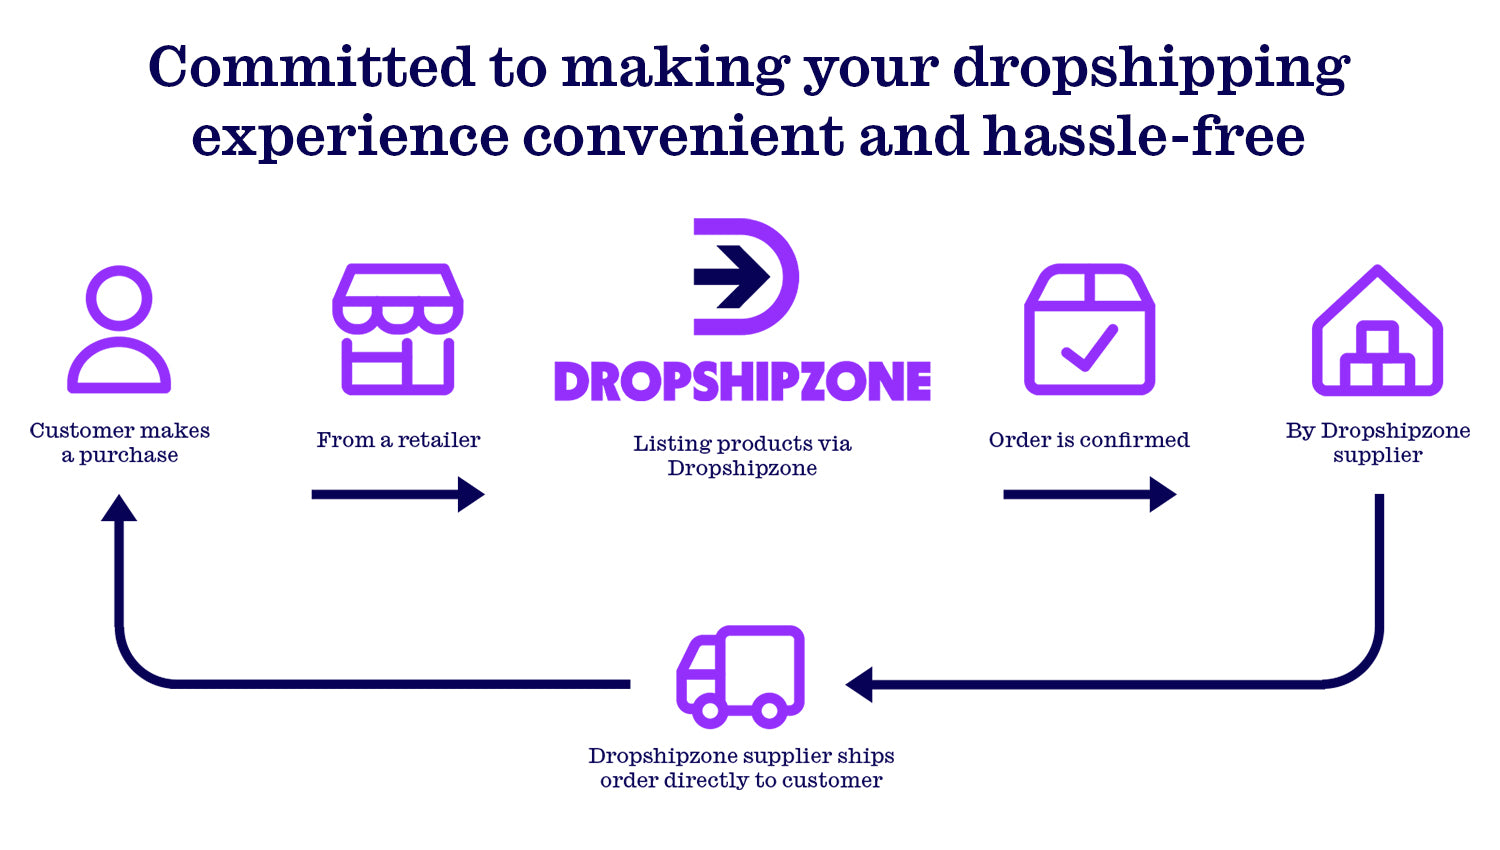 Join Dropshipzone today to take your business to the next level and make your dropshipping experience hassle-free.